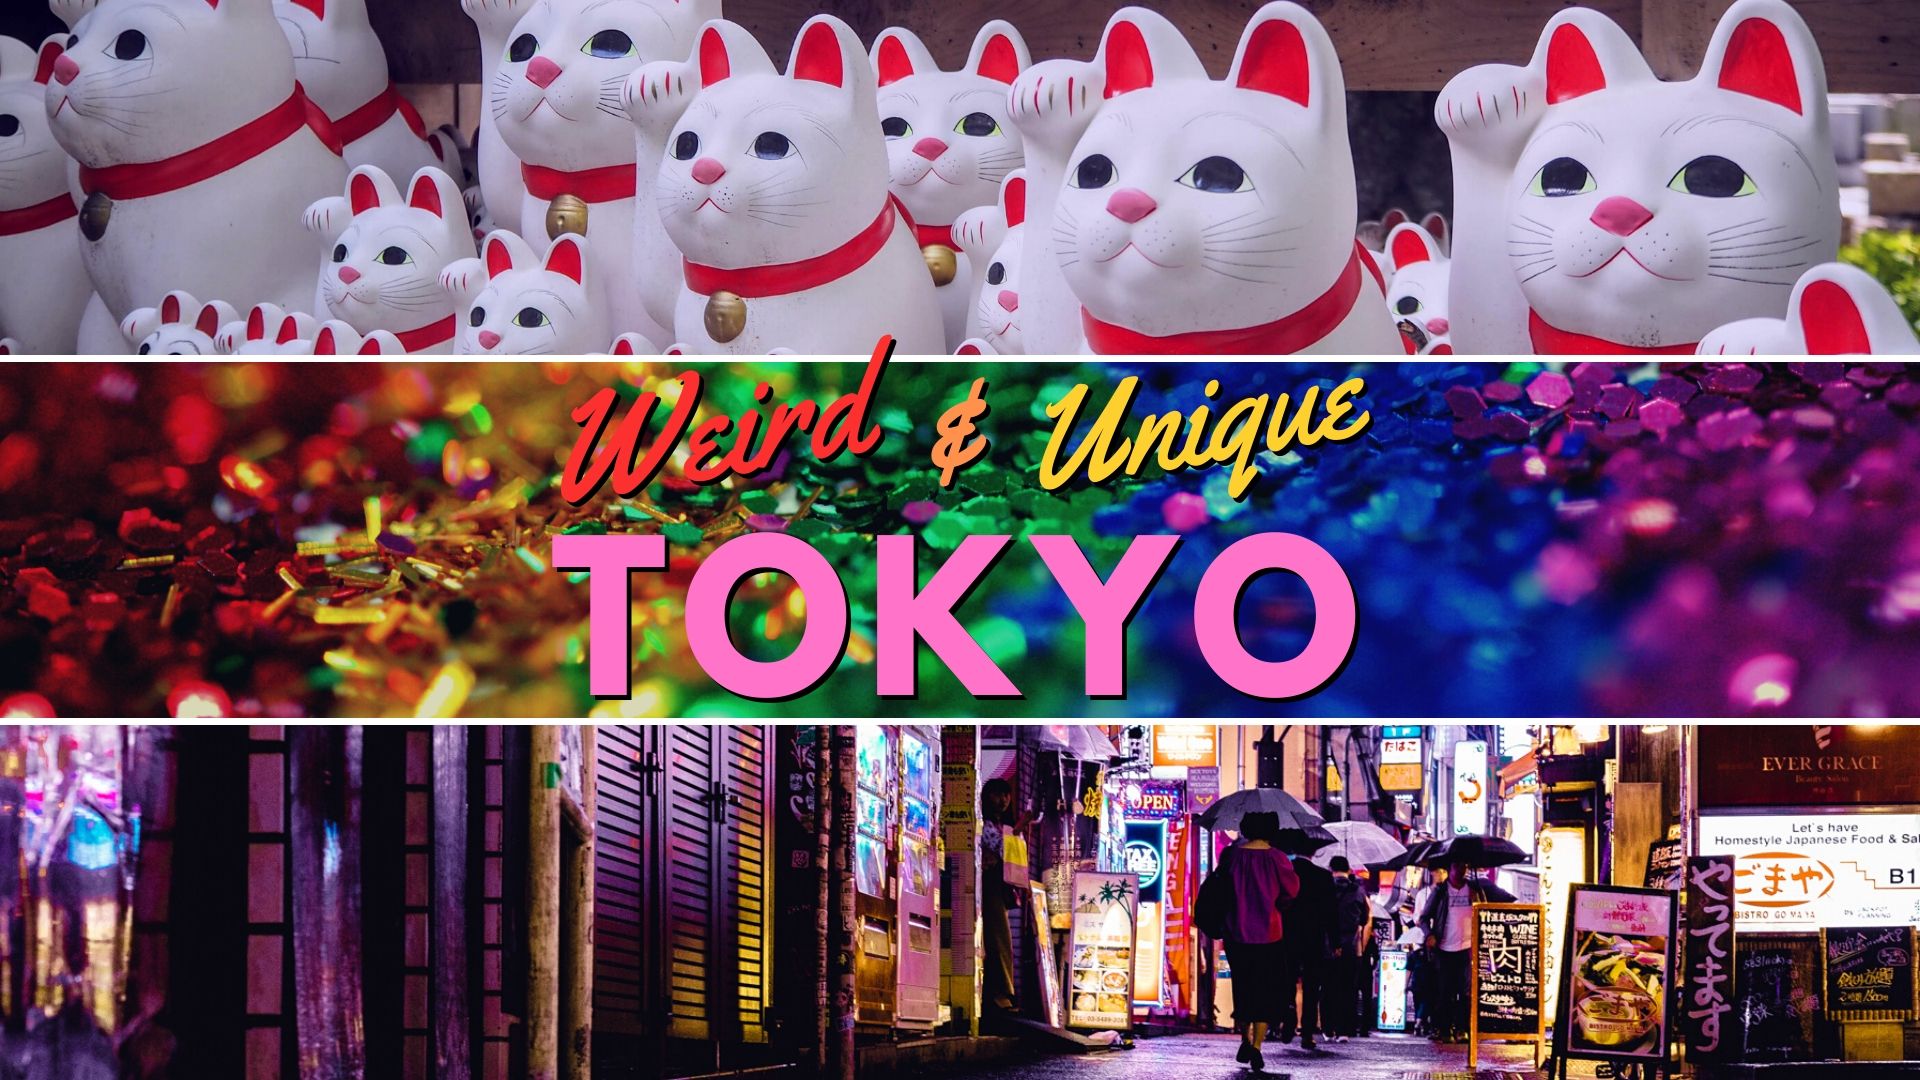 weird things to do in tokyo, unique things to do in tokyo, character street, gotokuji cat temple, mario kart, real like mario kart in tokyo, monster cafe, robot restaurant, sailor moon restaurant, ninja experience, weird tokyo experiences cover